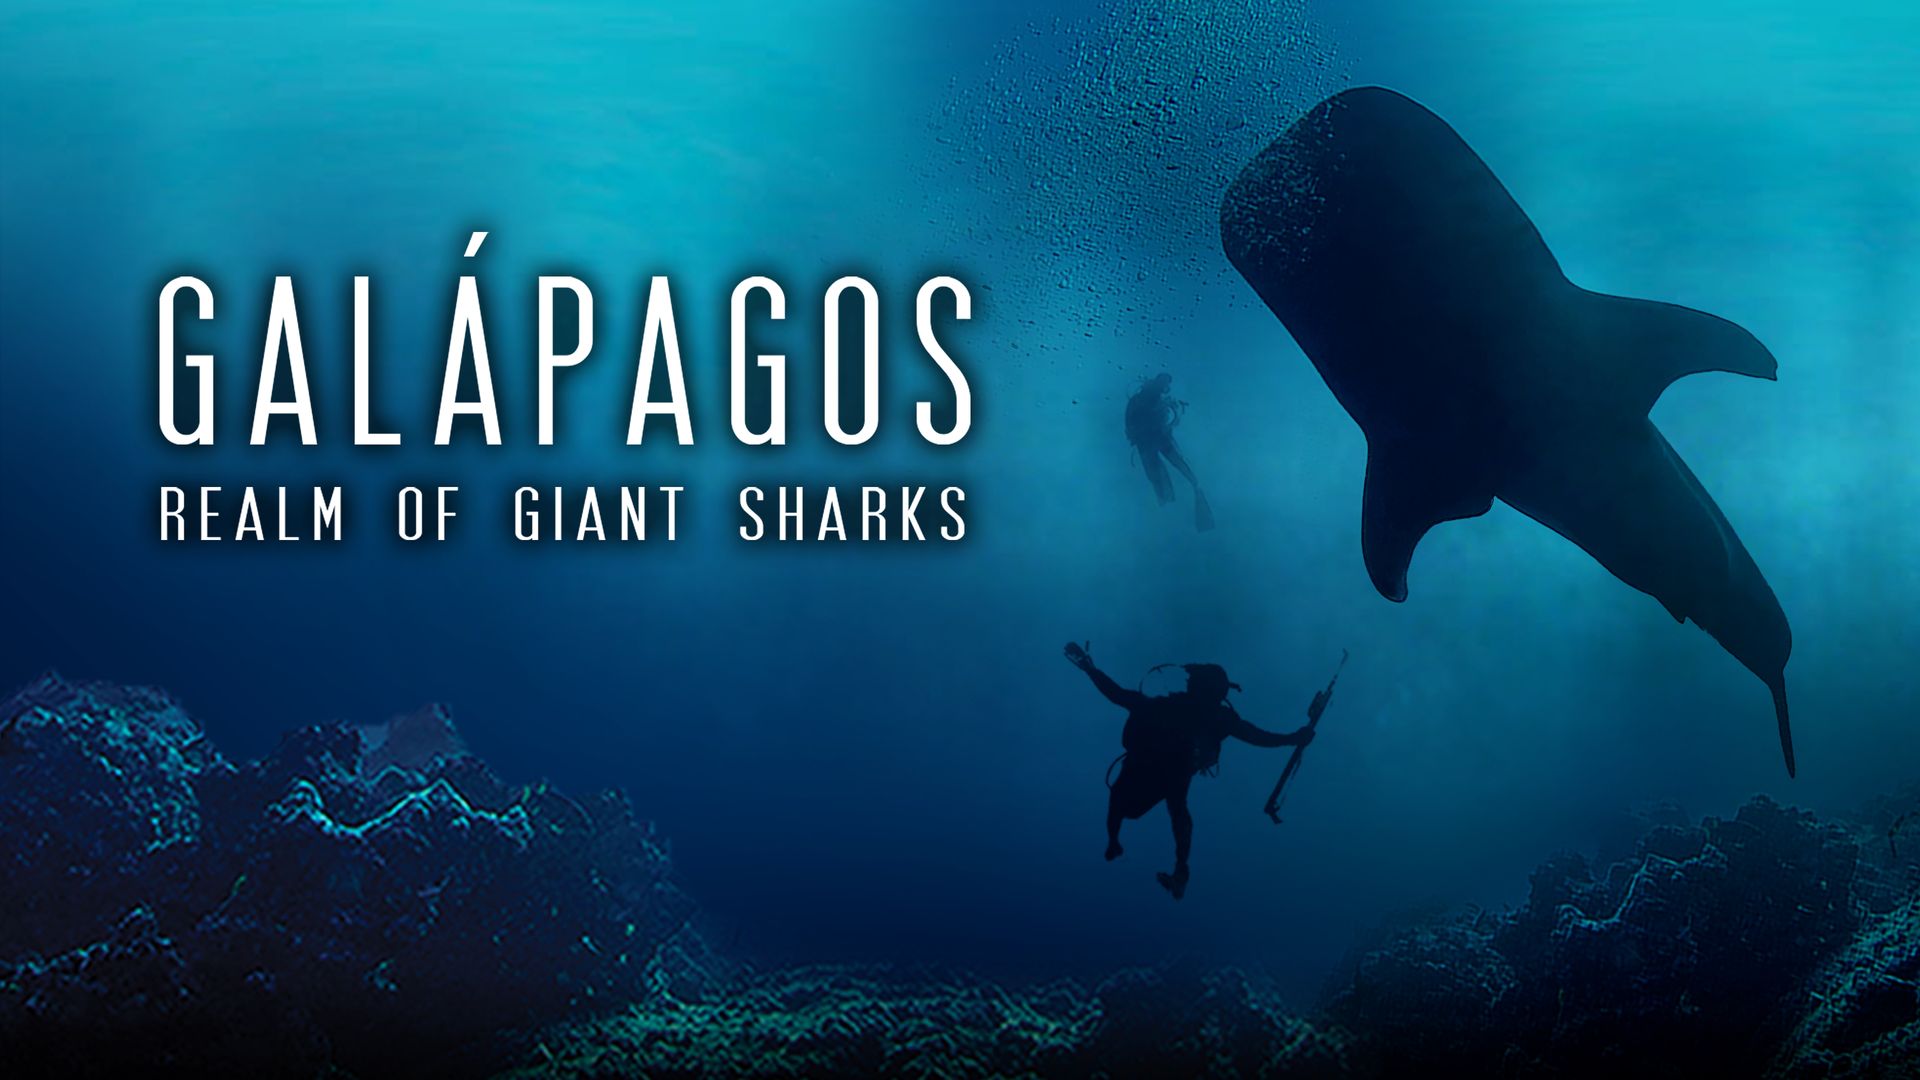 Galapagos Realm of Giant Sharks